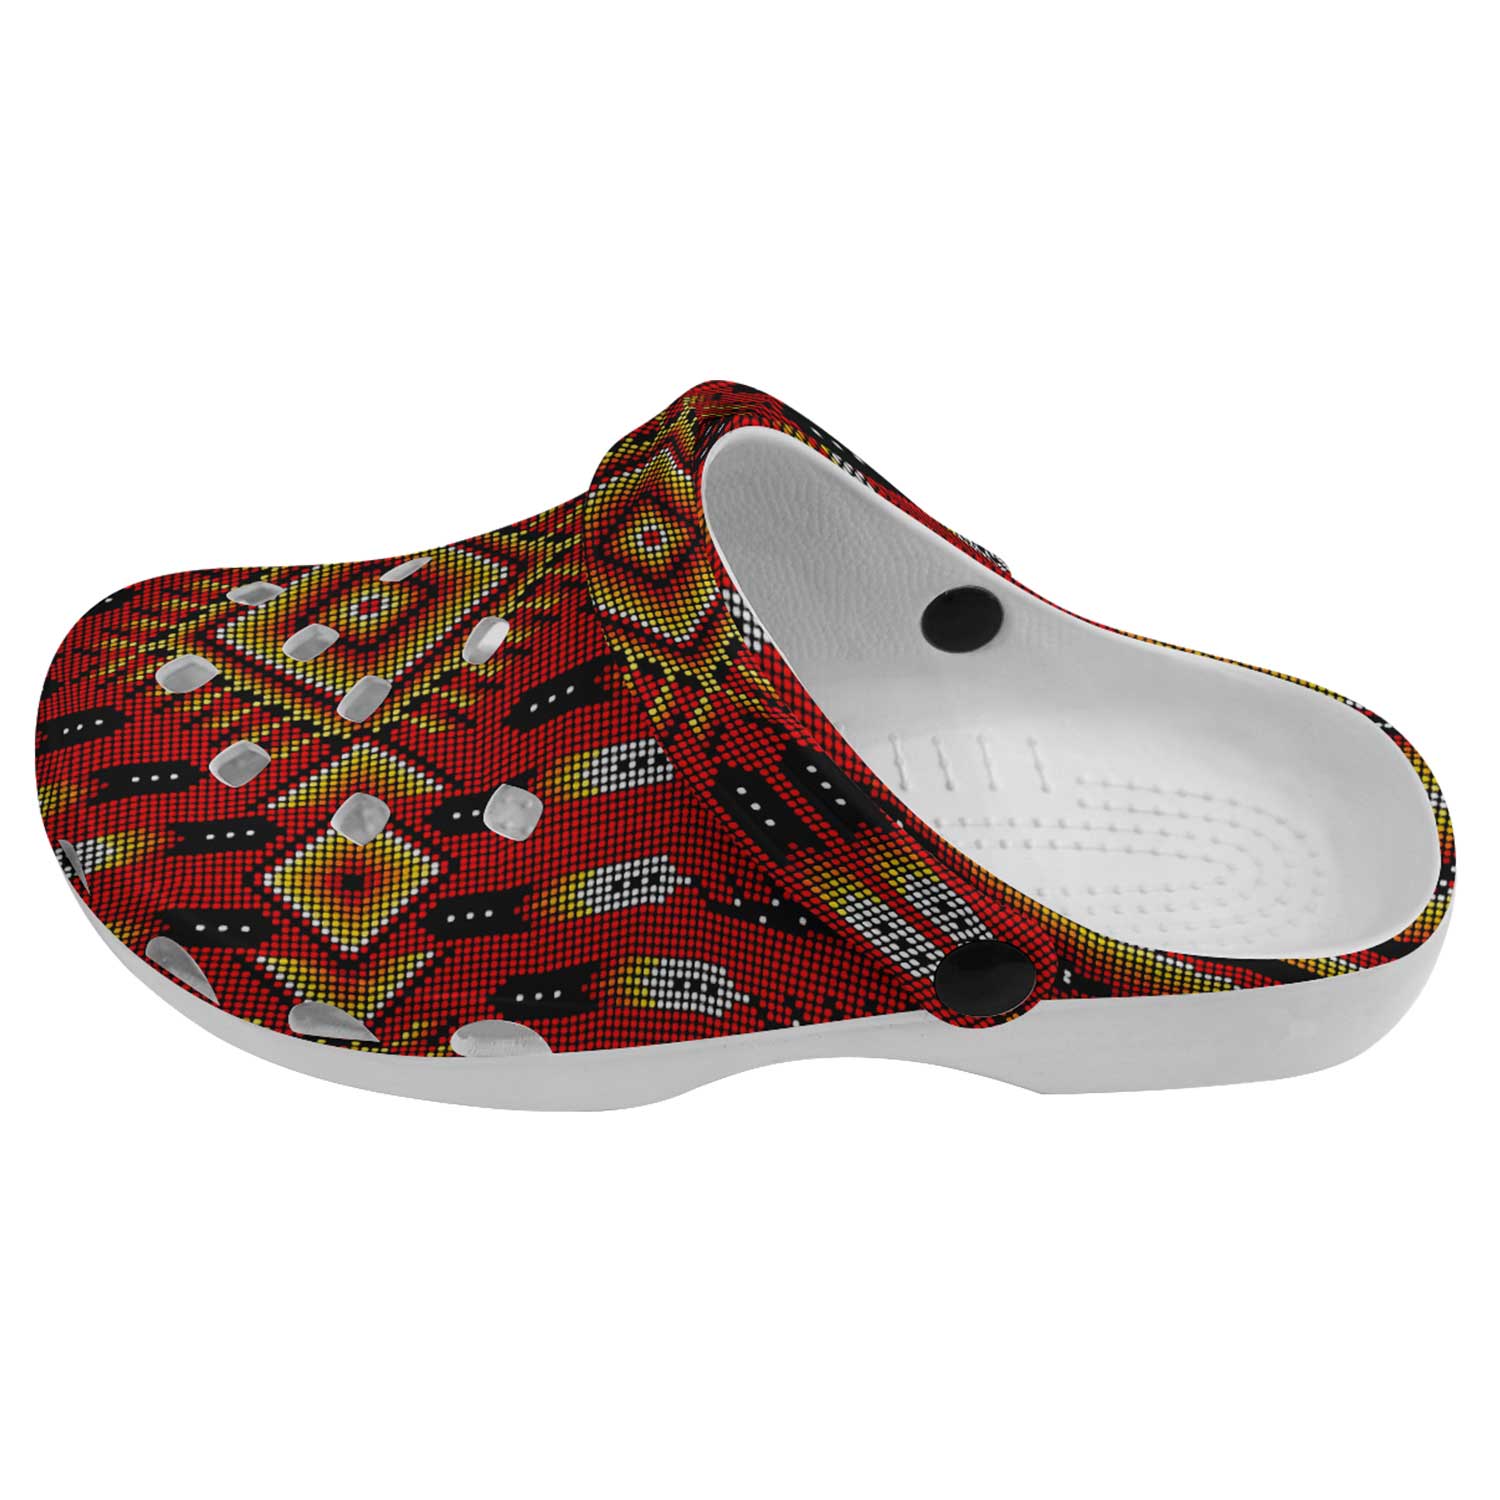 Fire Feather Red Muddies Unisex Clog Shoes